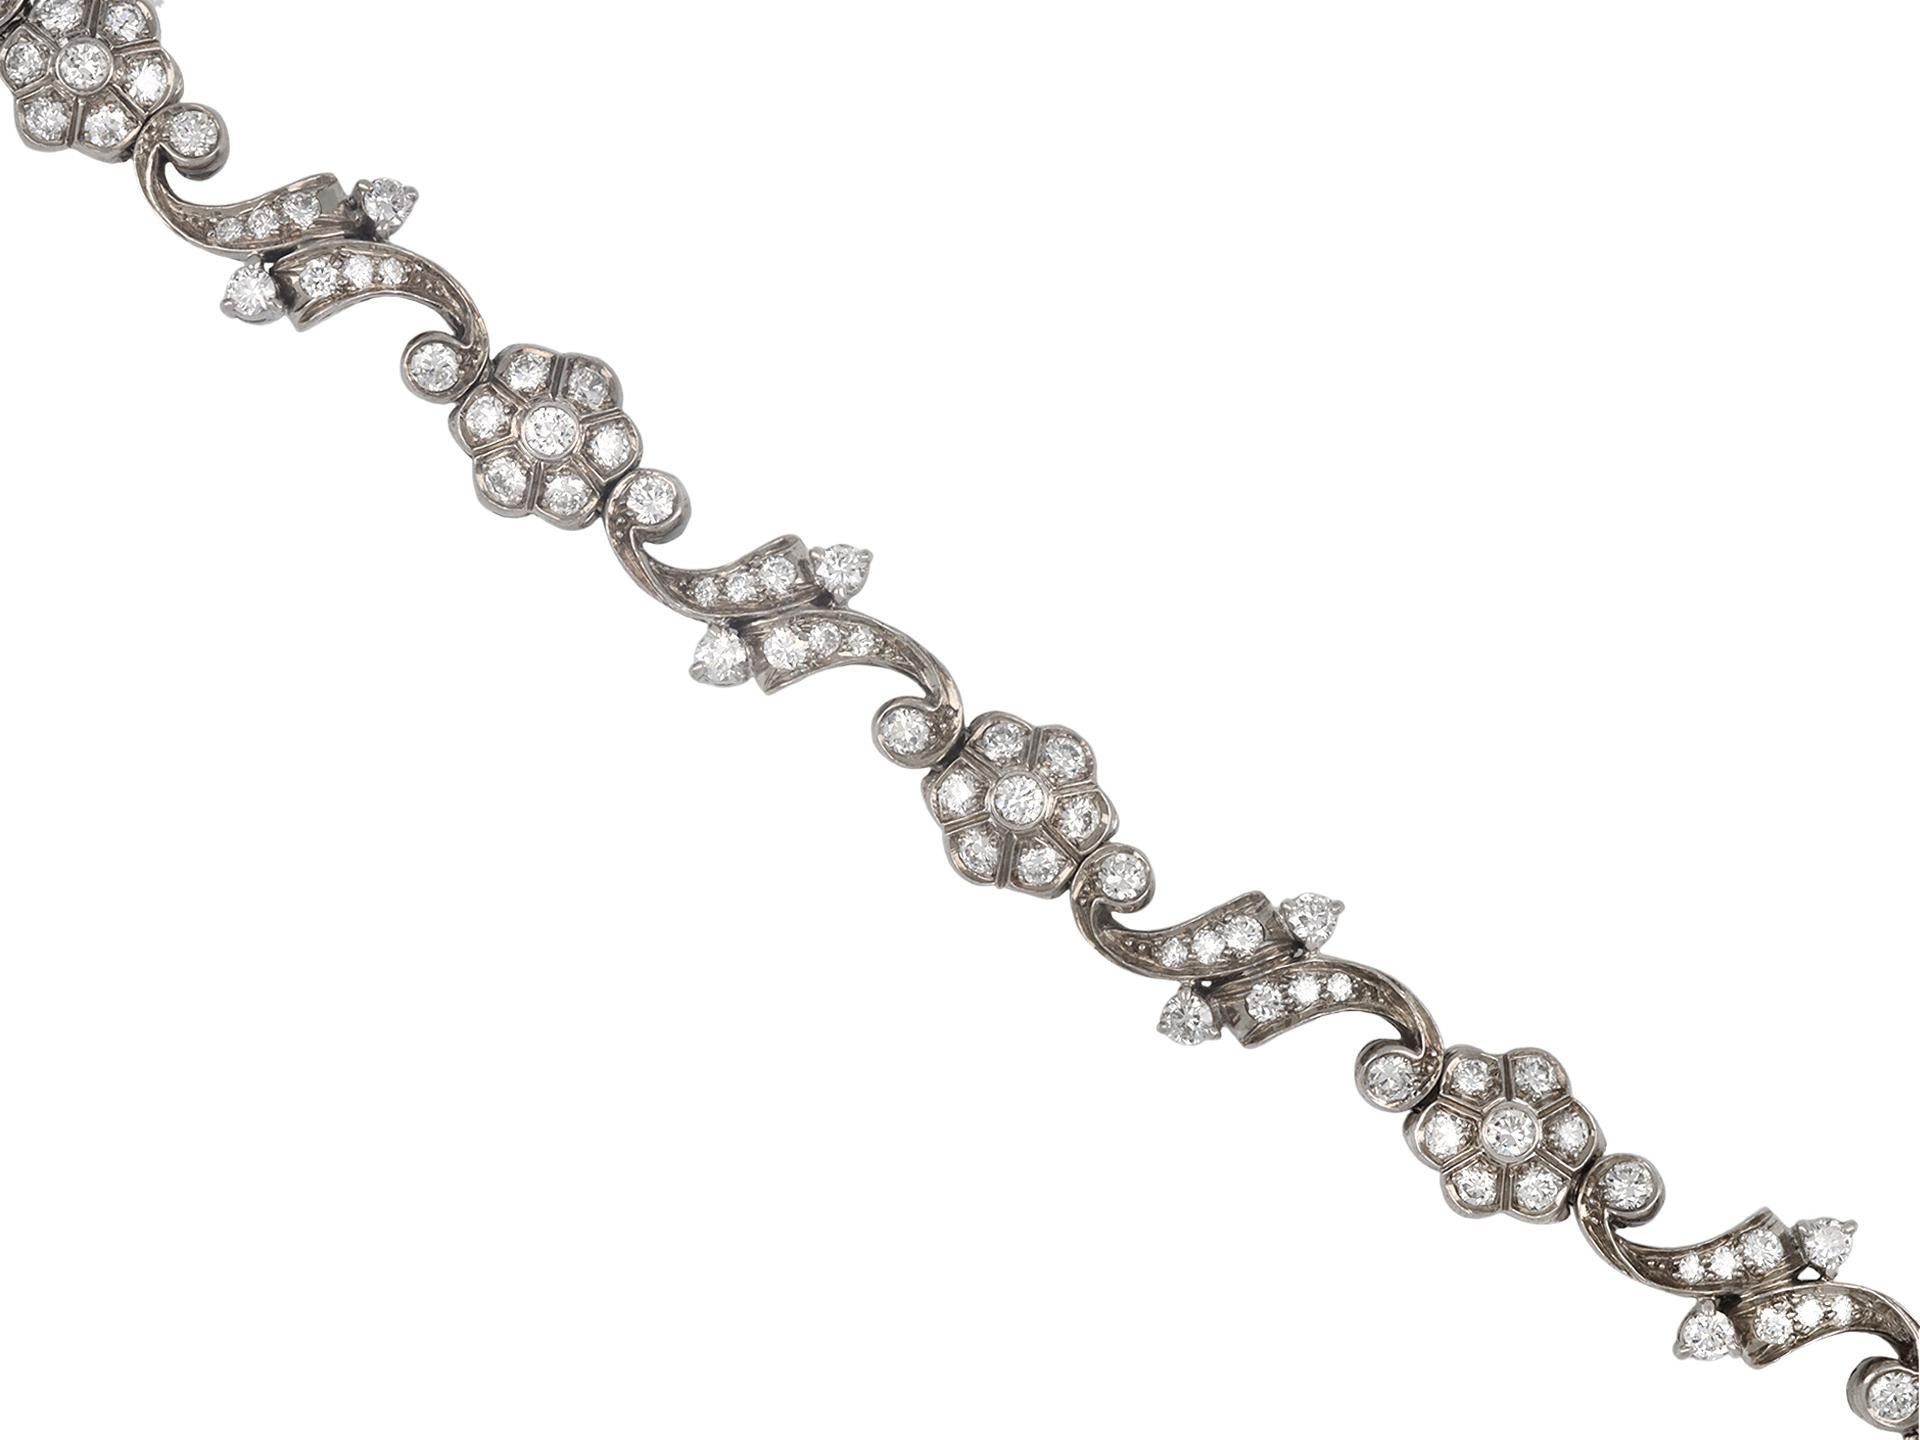 Tiffany & Co. diamond bracelet. Set with one hundred and two round old cut diamonds in open back grain, claw and rubover settings with a combined approximate weight of 4.00 carats, to an articulated bracelet consisting of elegant floral motif links